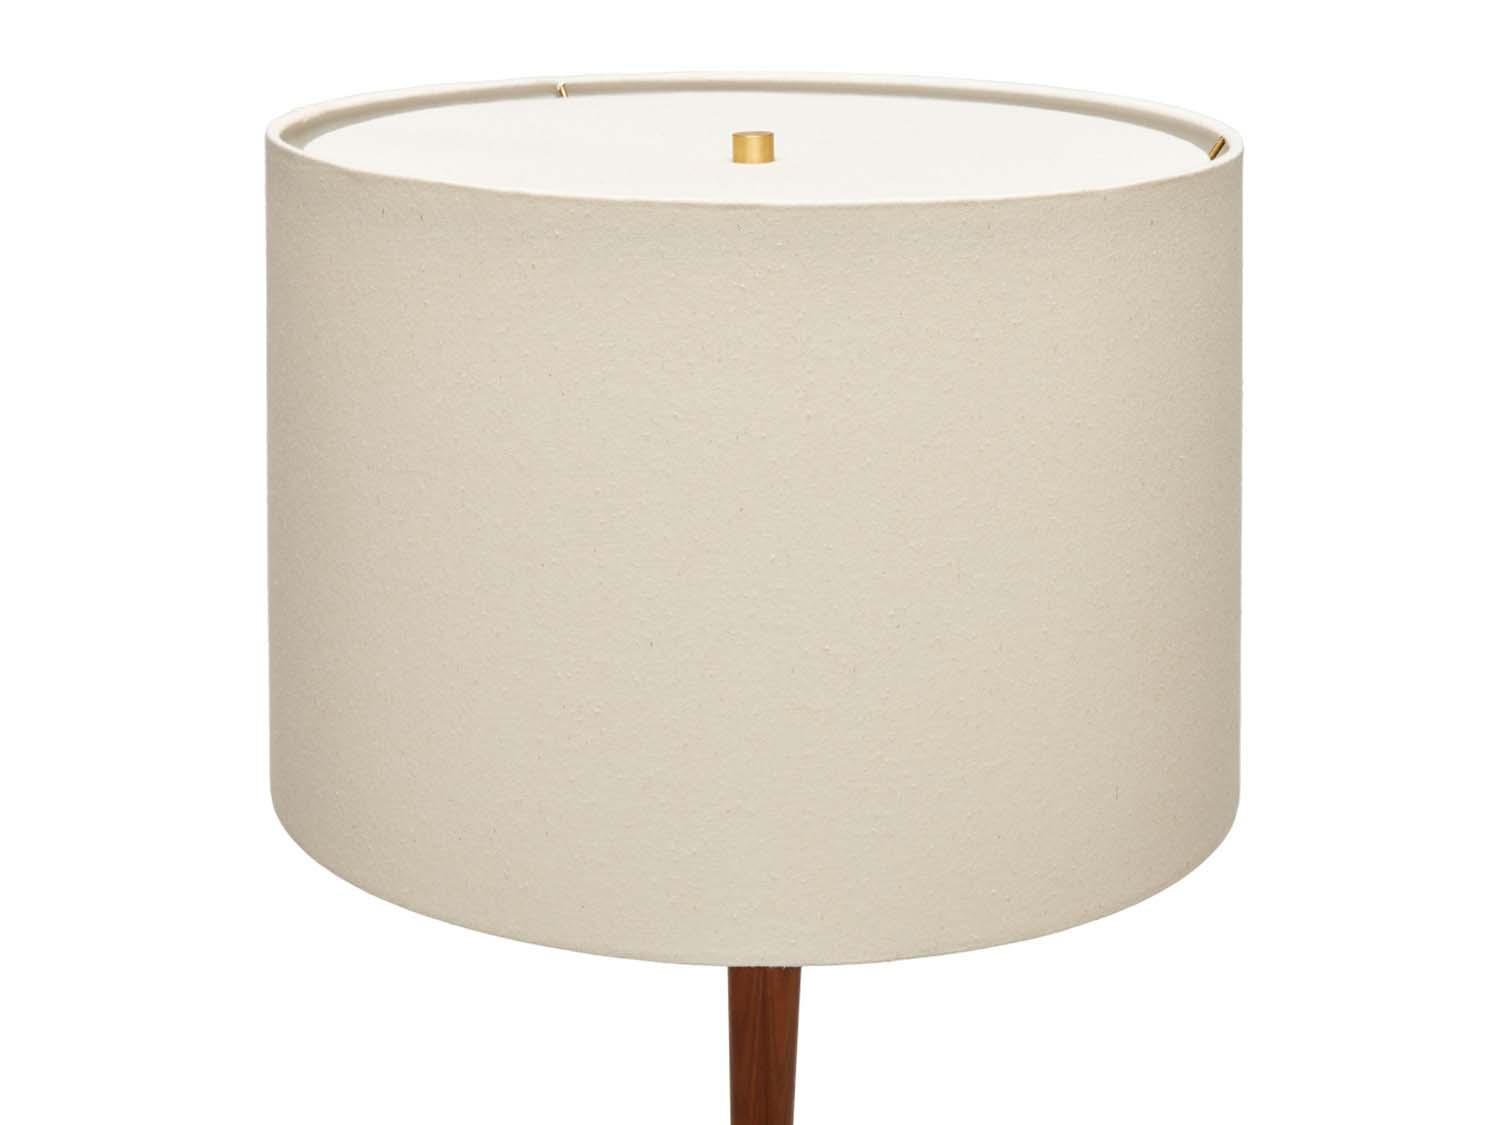 The El Monte lamp is made from turned solid American walnut or white oak with a brass knuckle. The drum shade is linen and includes a diffuser.

The Lawson-Fenning Collection is designed and handmade in Los Angeles, California. Reach out to